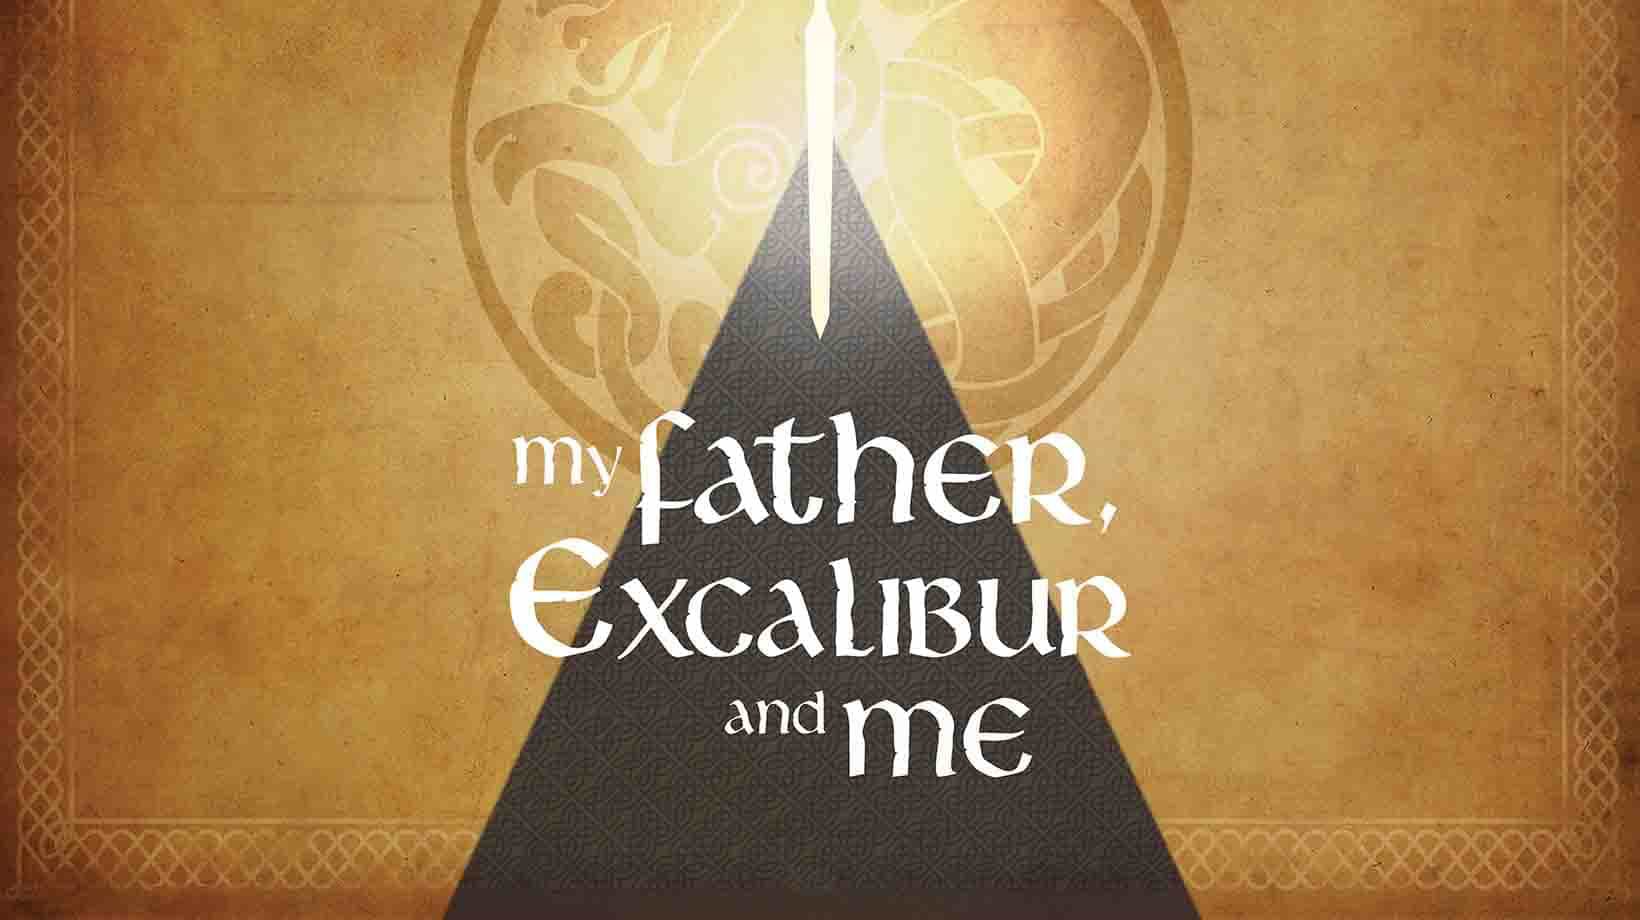 My father, Excalibur and me